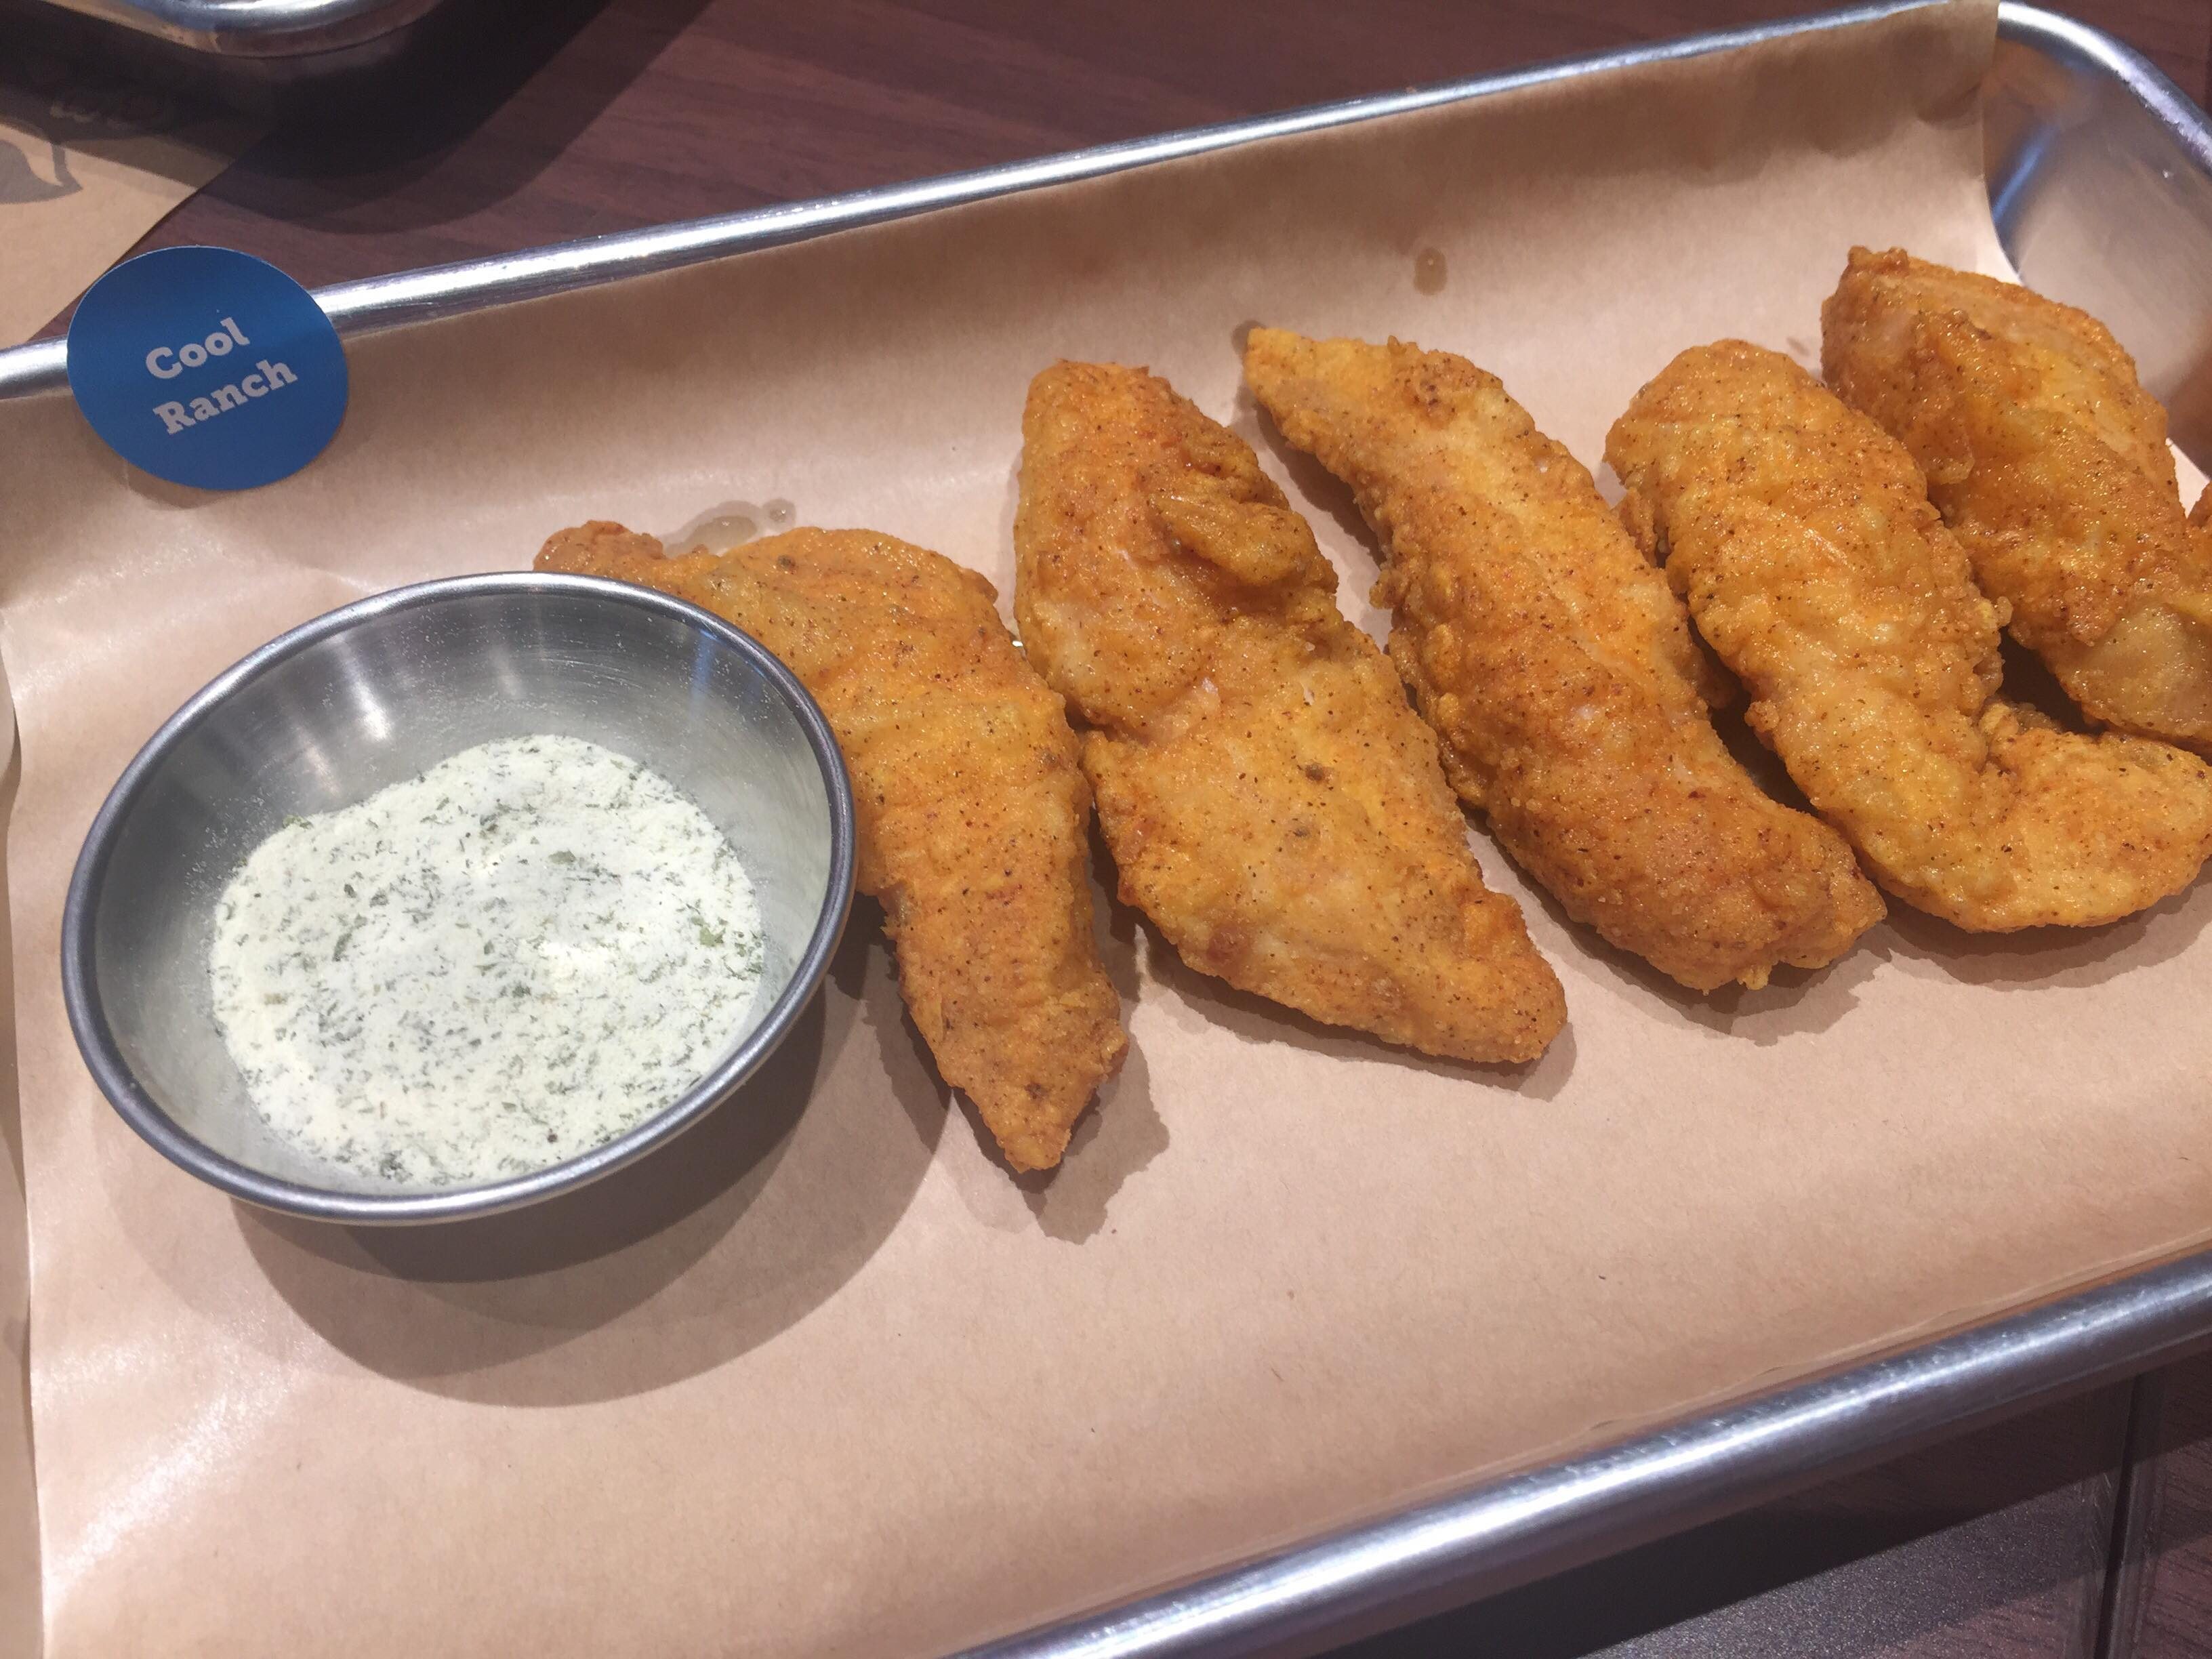 Chicken strips with cool ranch and lemon zinger P165. Photo by Nicole Limlengco/Rappler 